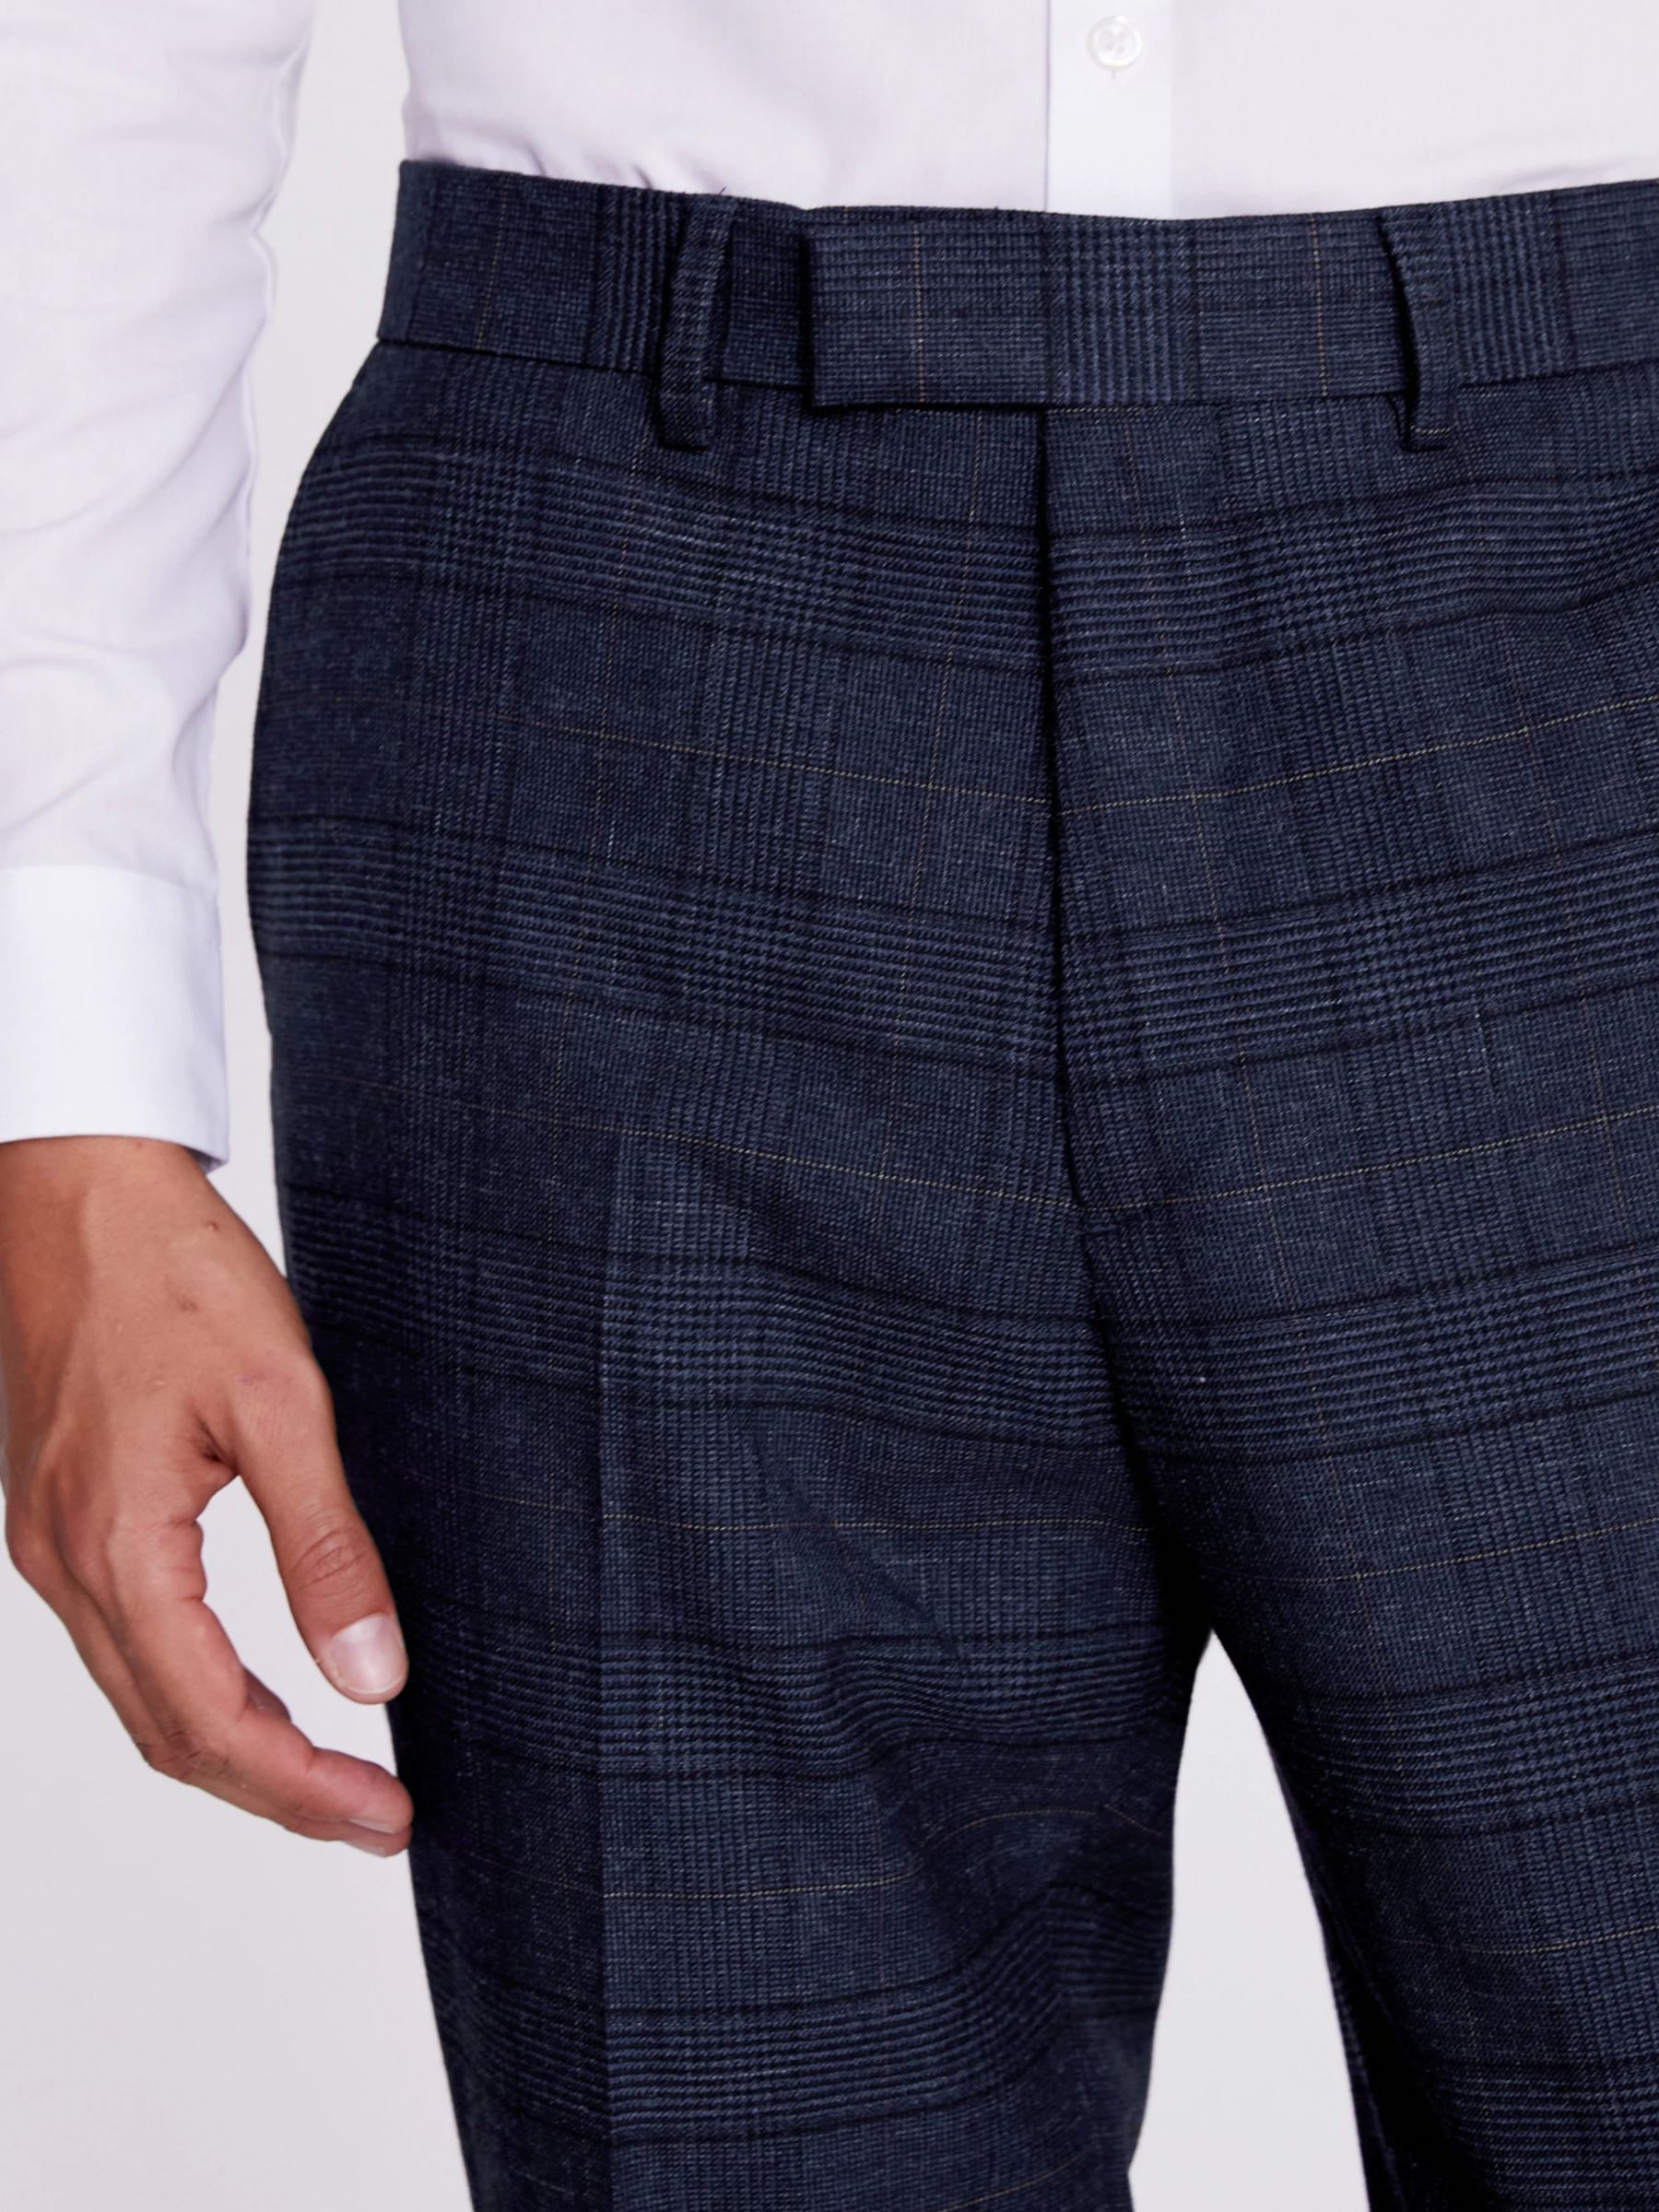 Buy Moss Regular Fit Check Suit Trousers, Navy/Black Online at johnlewis.com